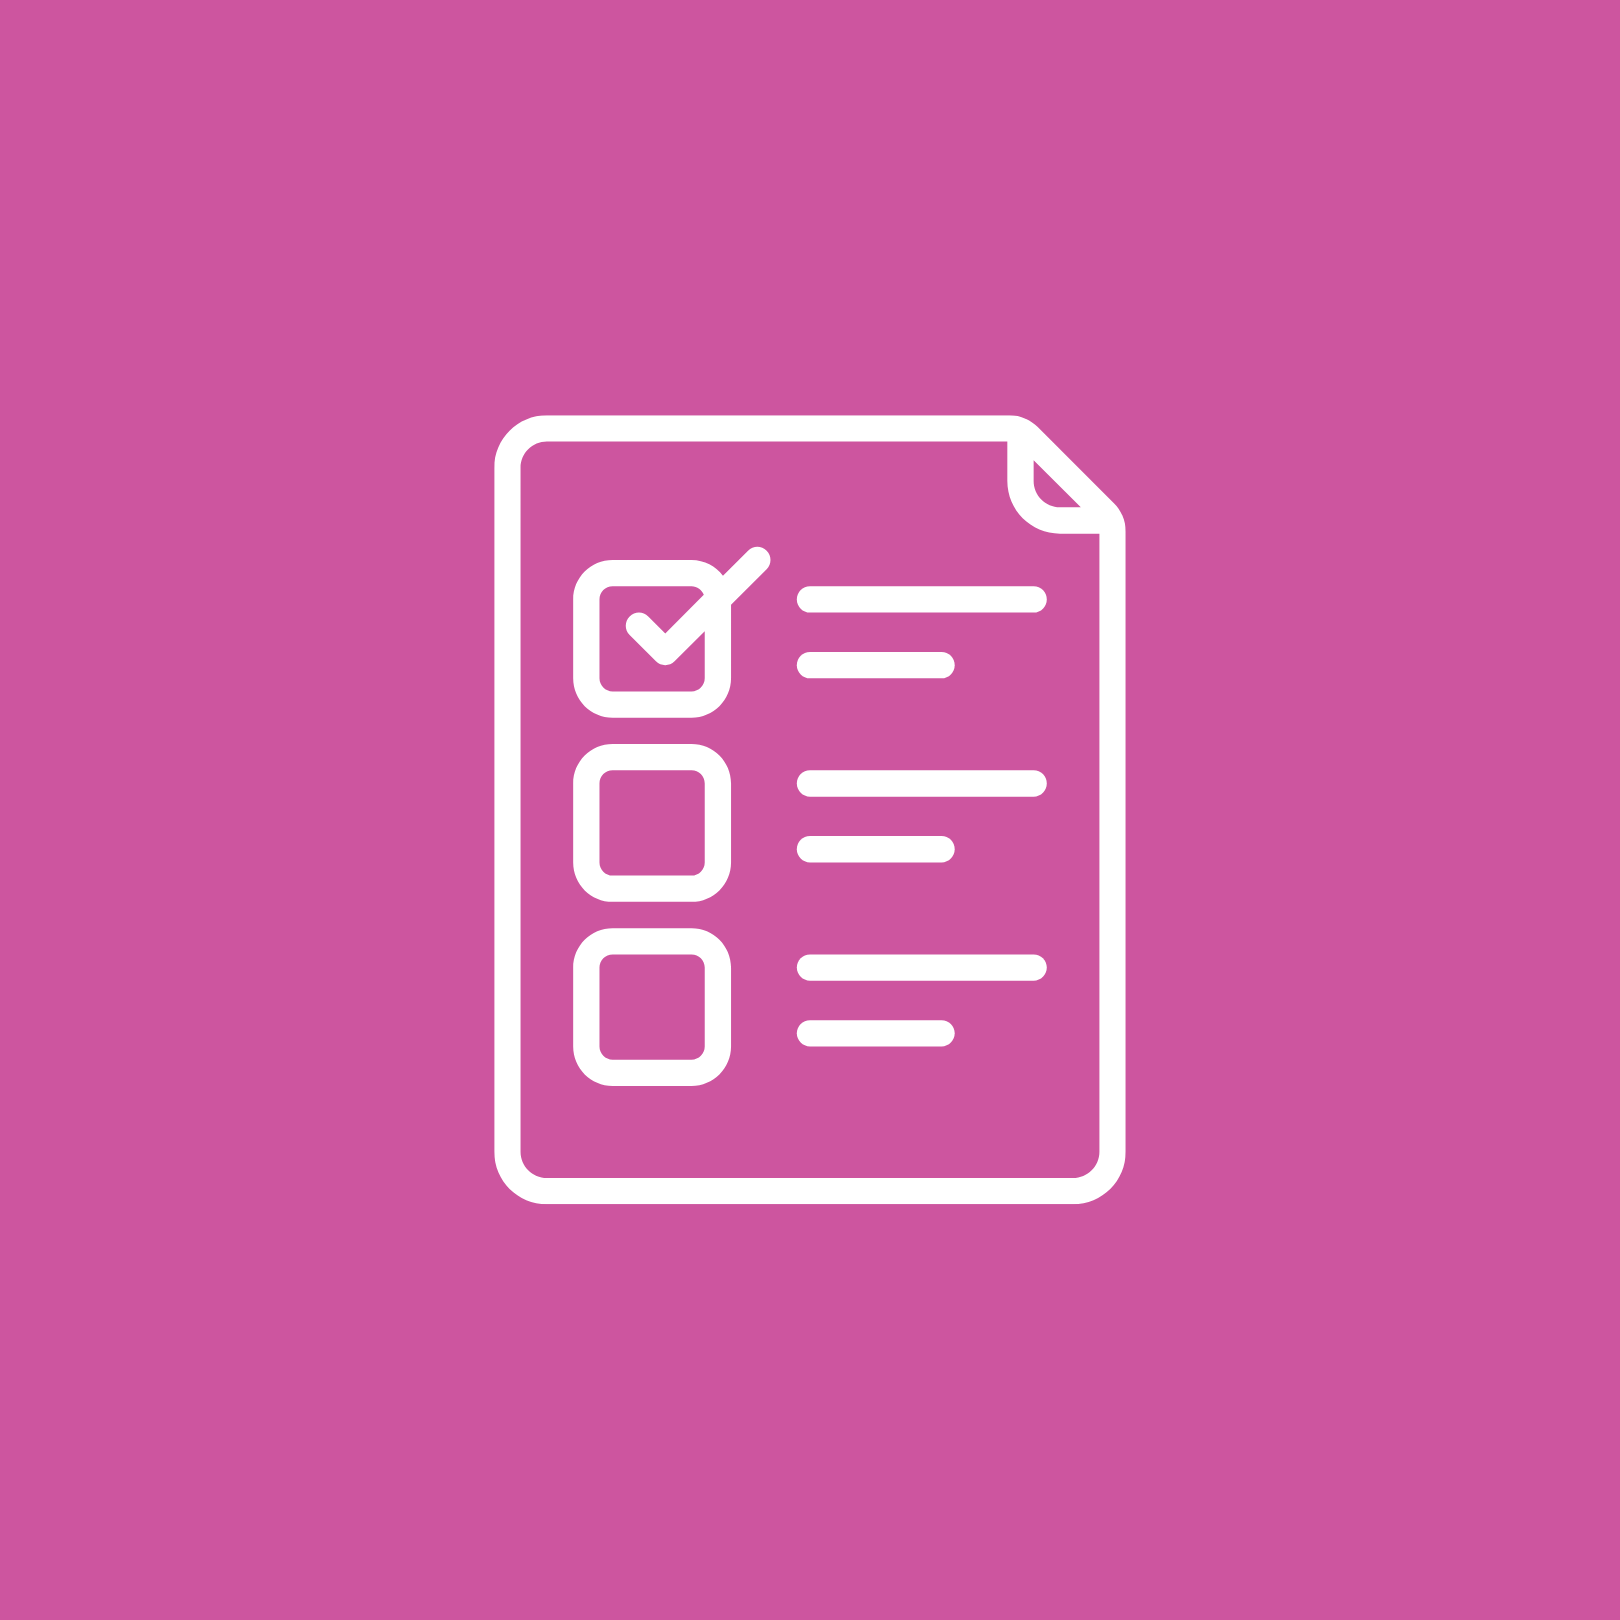 A line icon of a checklist on a pink background.